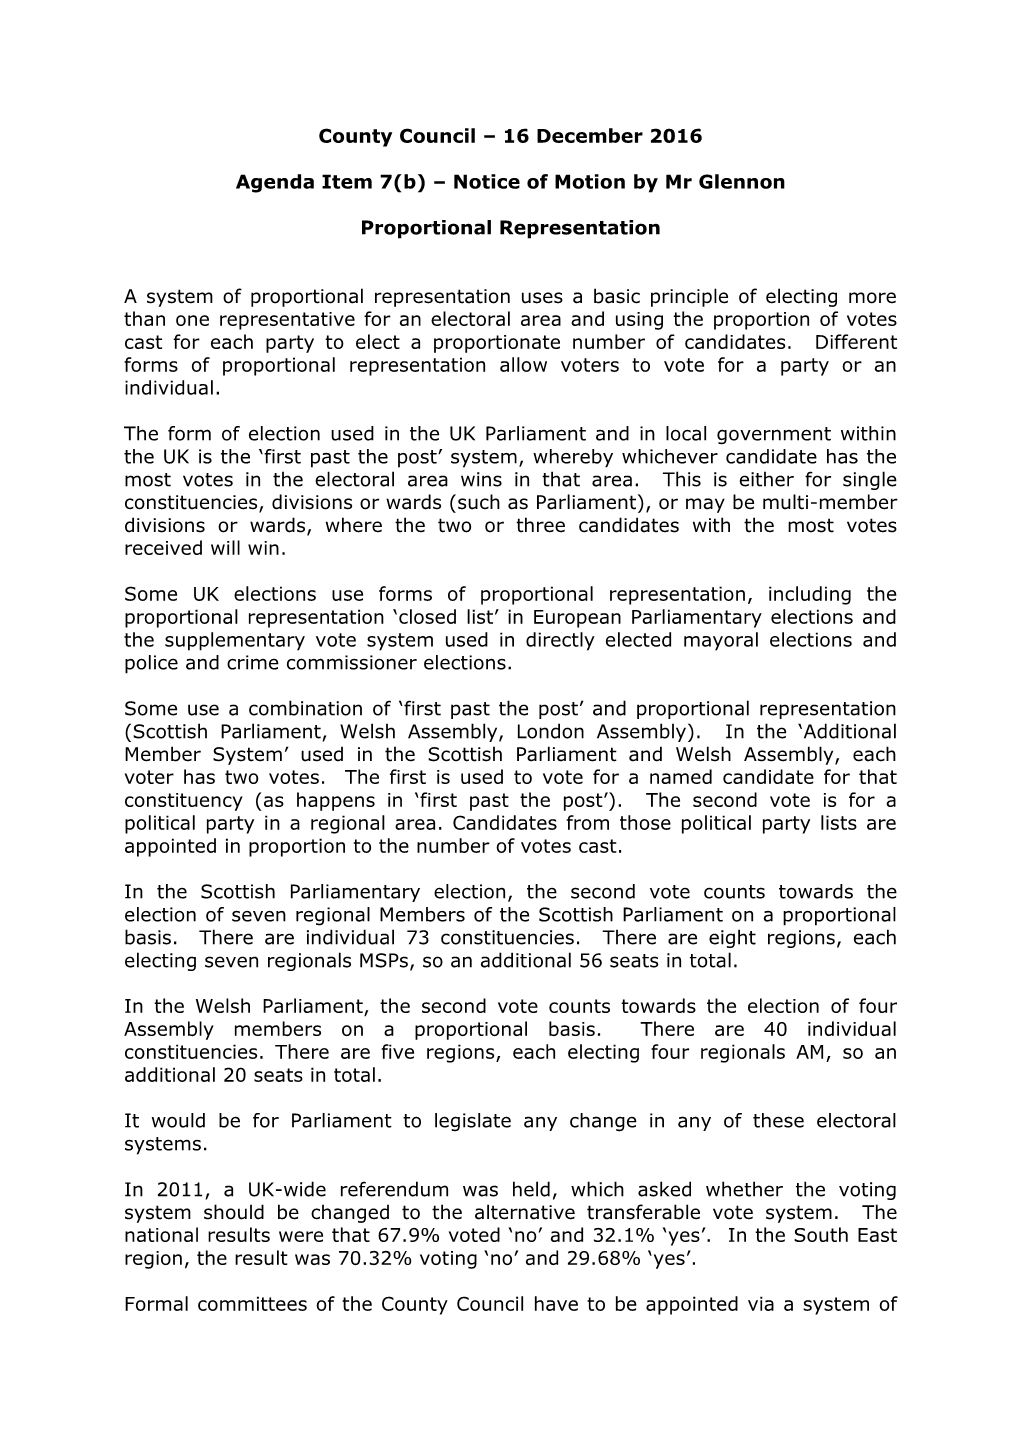 Notice of Motion on Proportional Representation